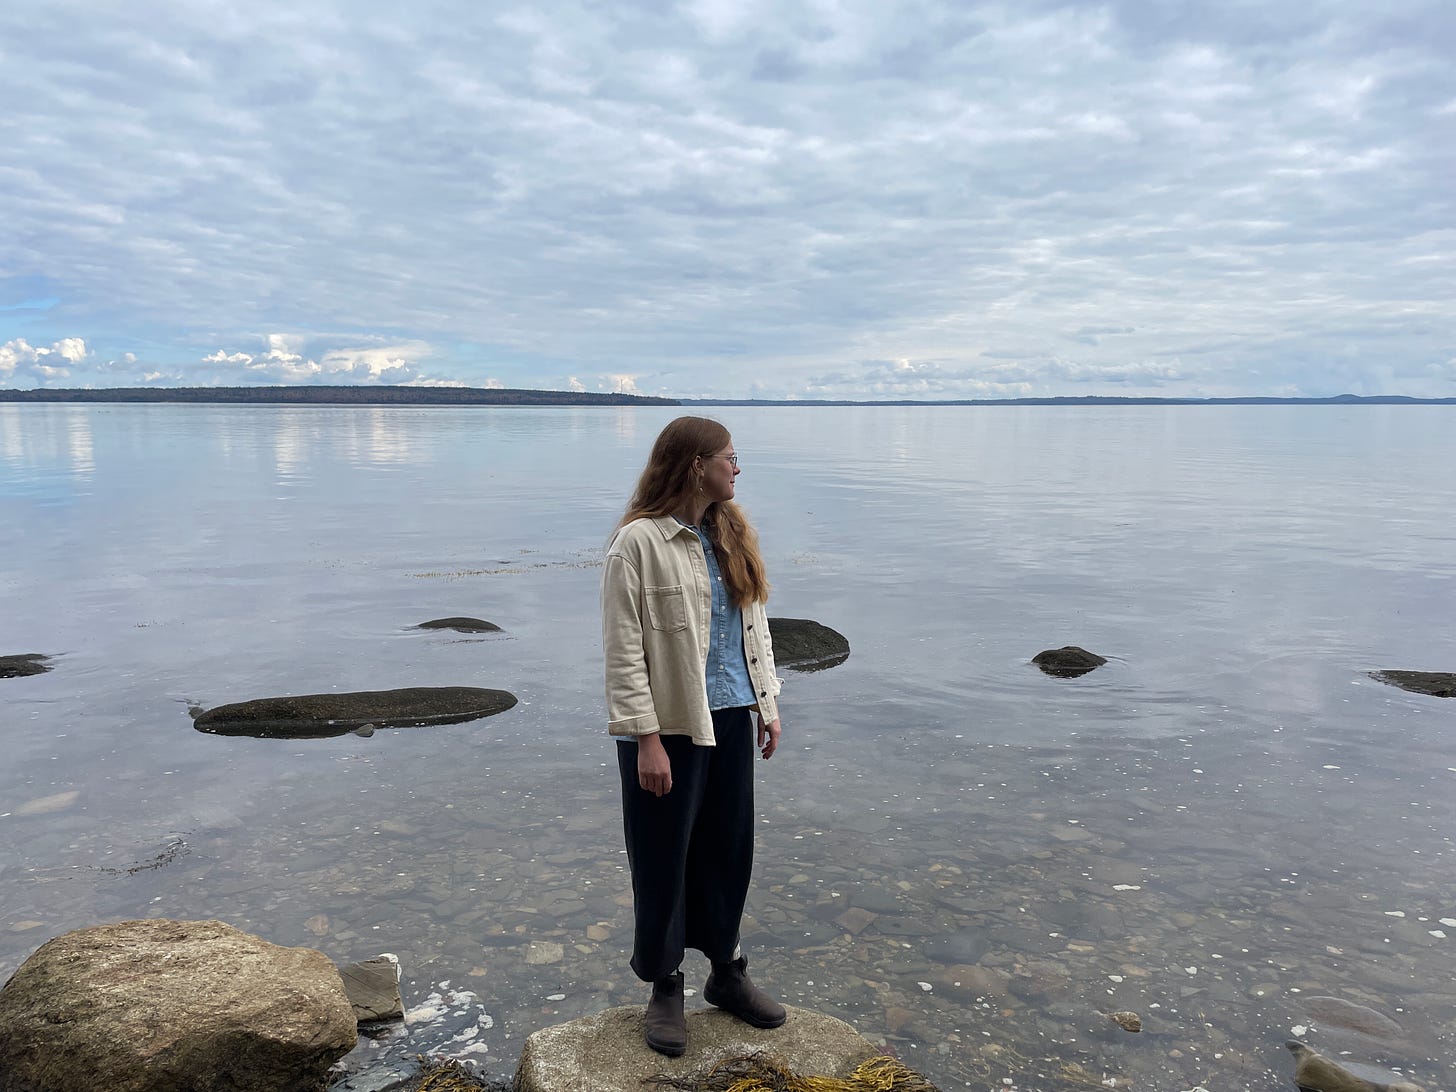 A women at center, wearing a cream jacket, denim shirt, dark grey pants and boots. She is also wearing thin, wire framed glasses and freshwater pearl earrings. She has long, strawberry blonde hair. She is standing on a rock at the edge of a river/bay. You can see clouds and the land on the horizon behind her. 